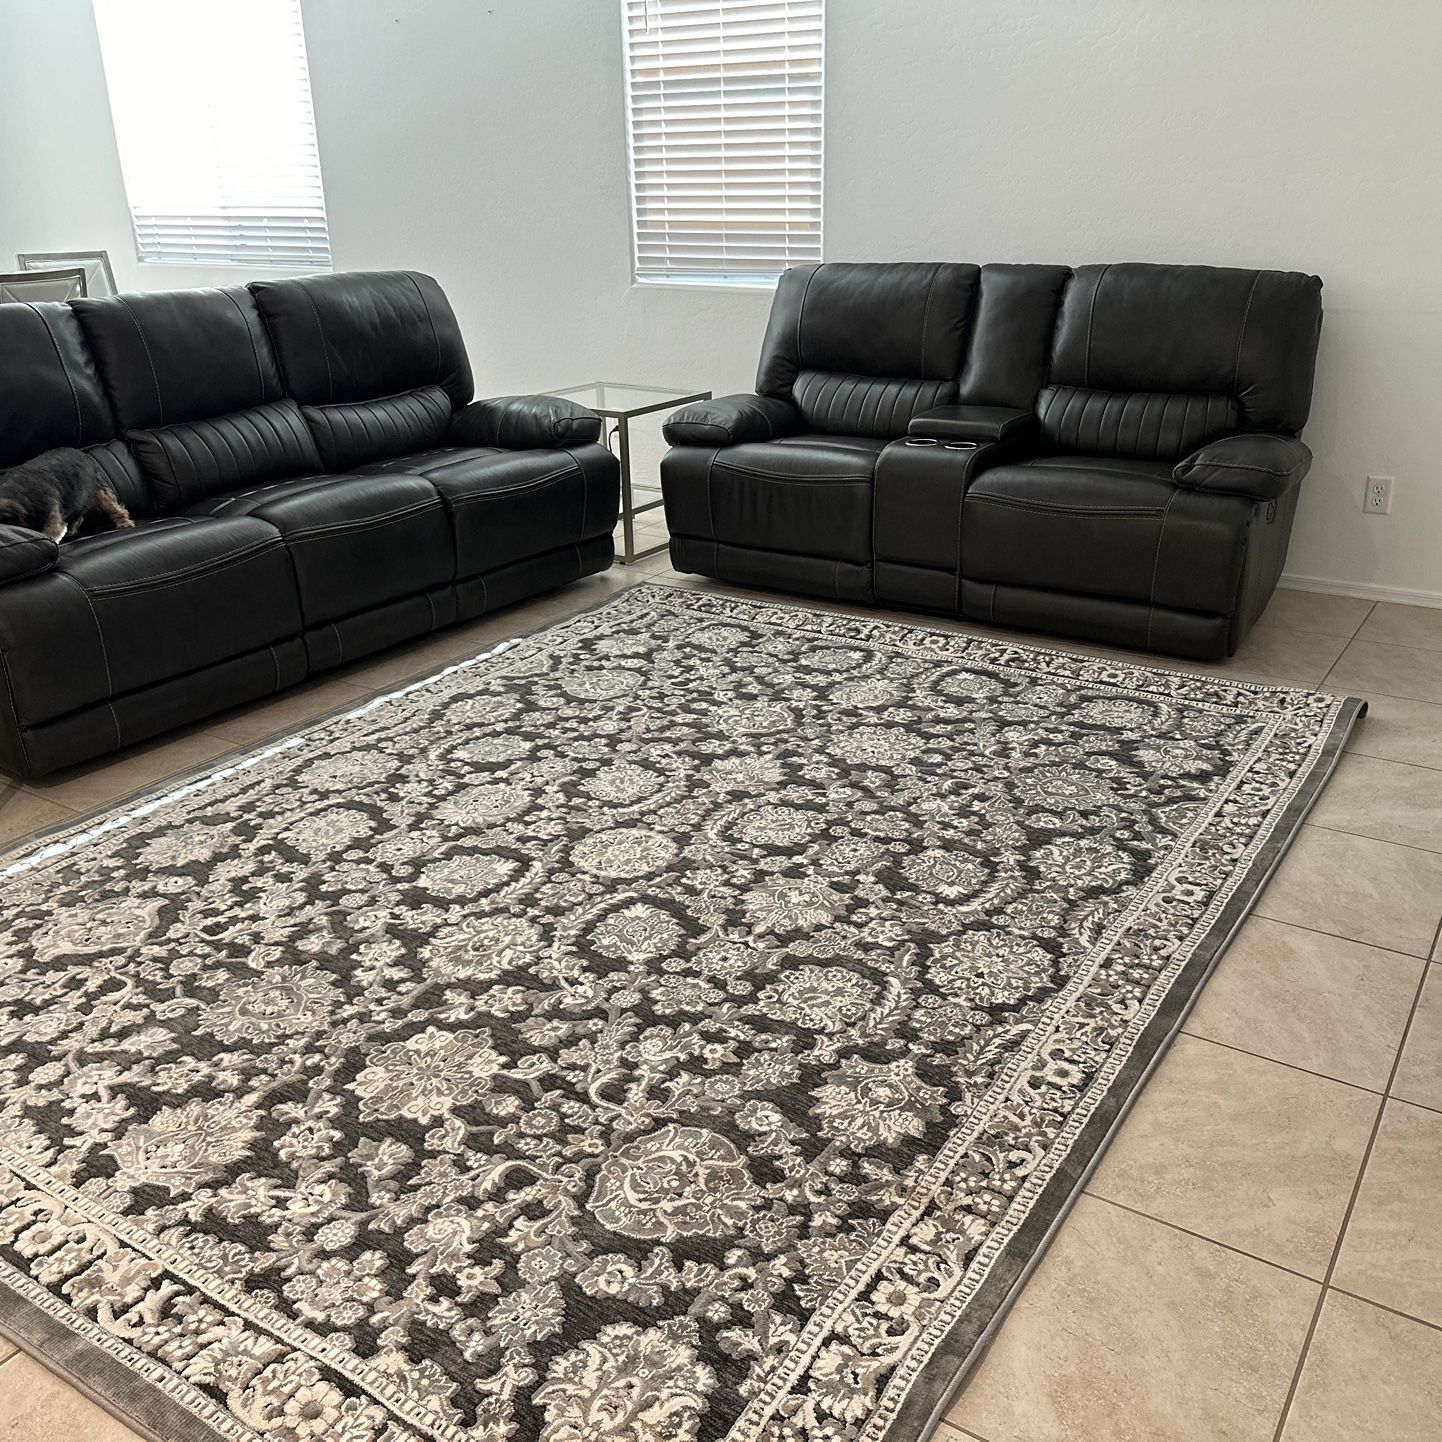 2 Piece Sofa, And Loveseat Recliner Leather